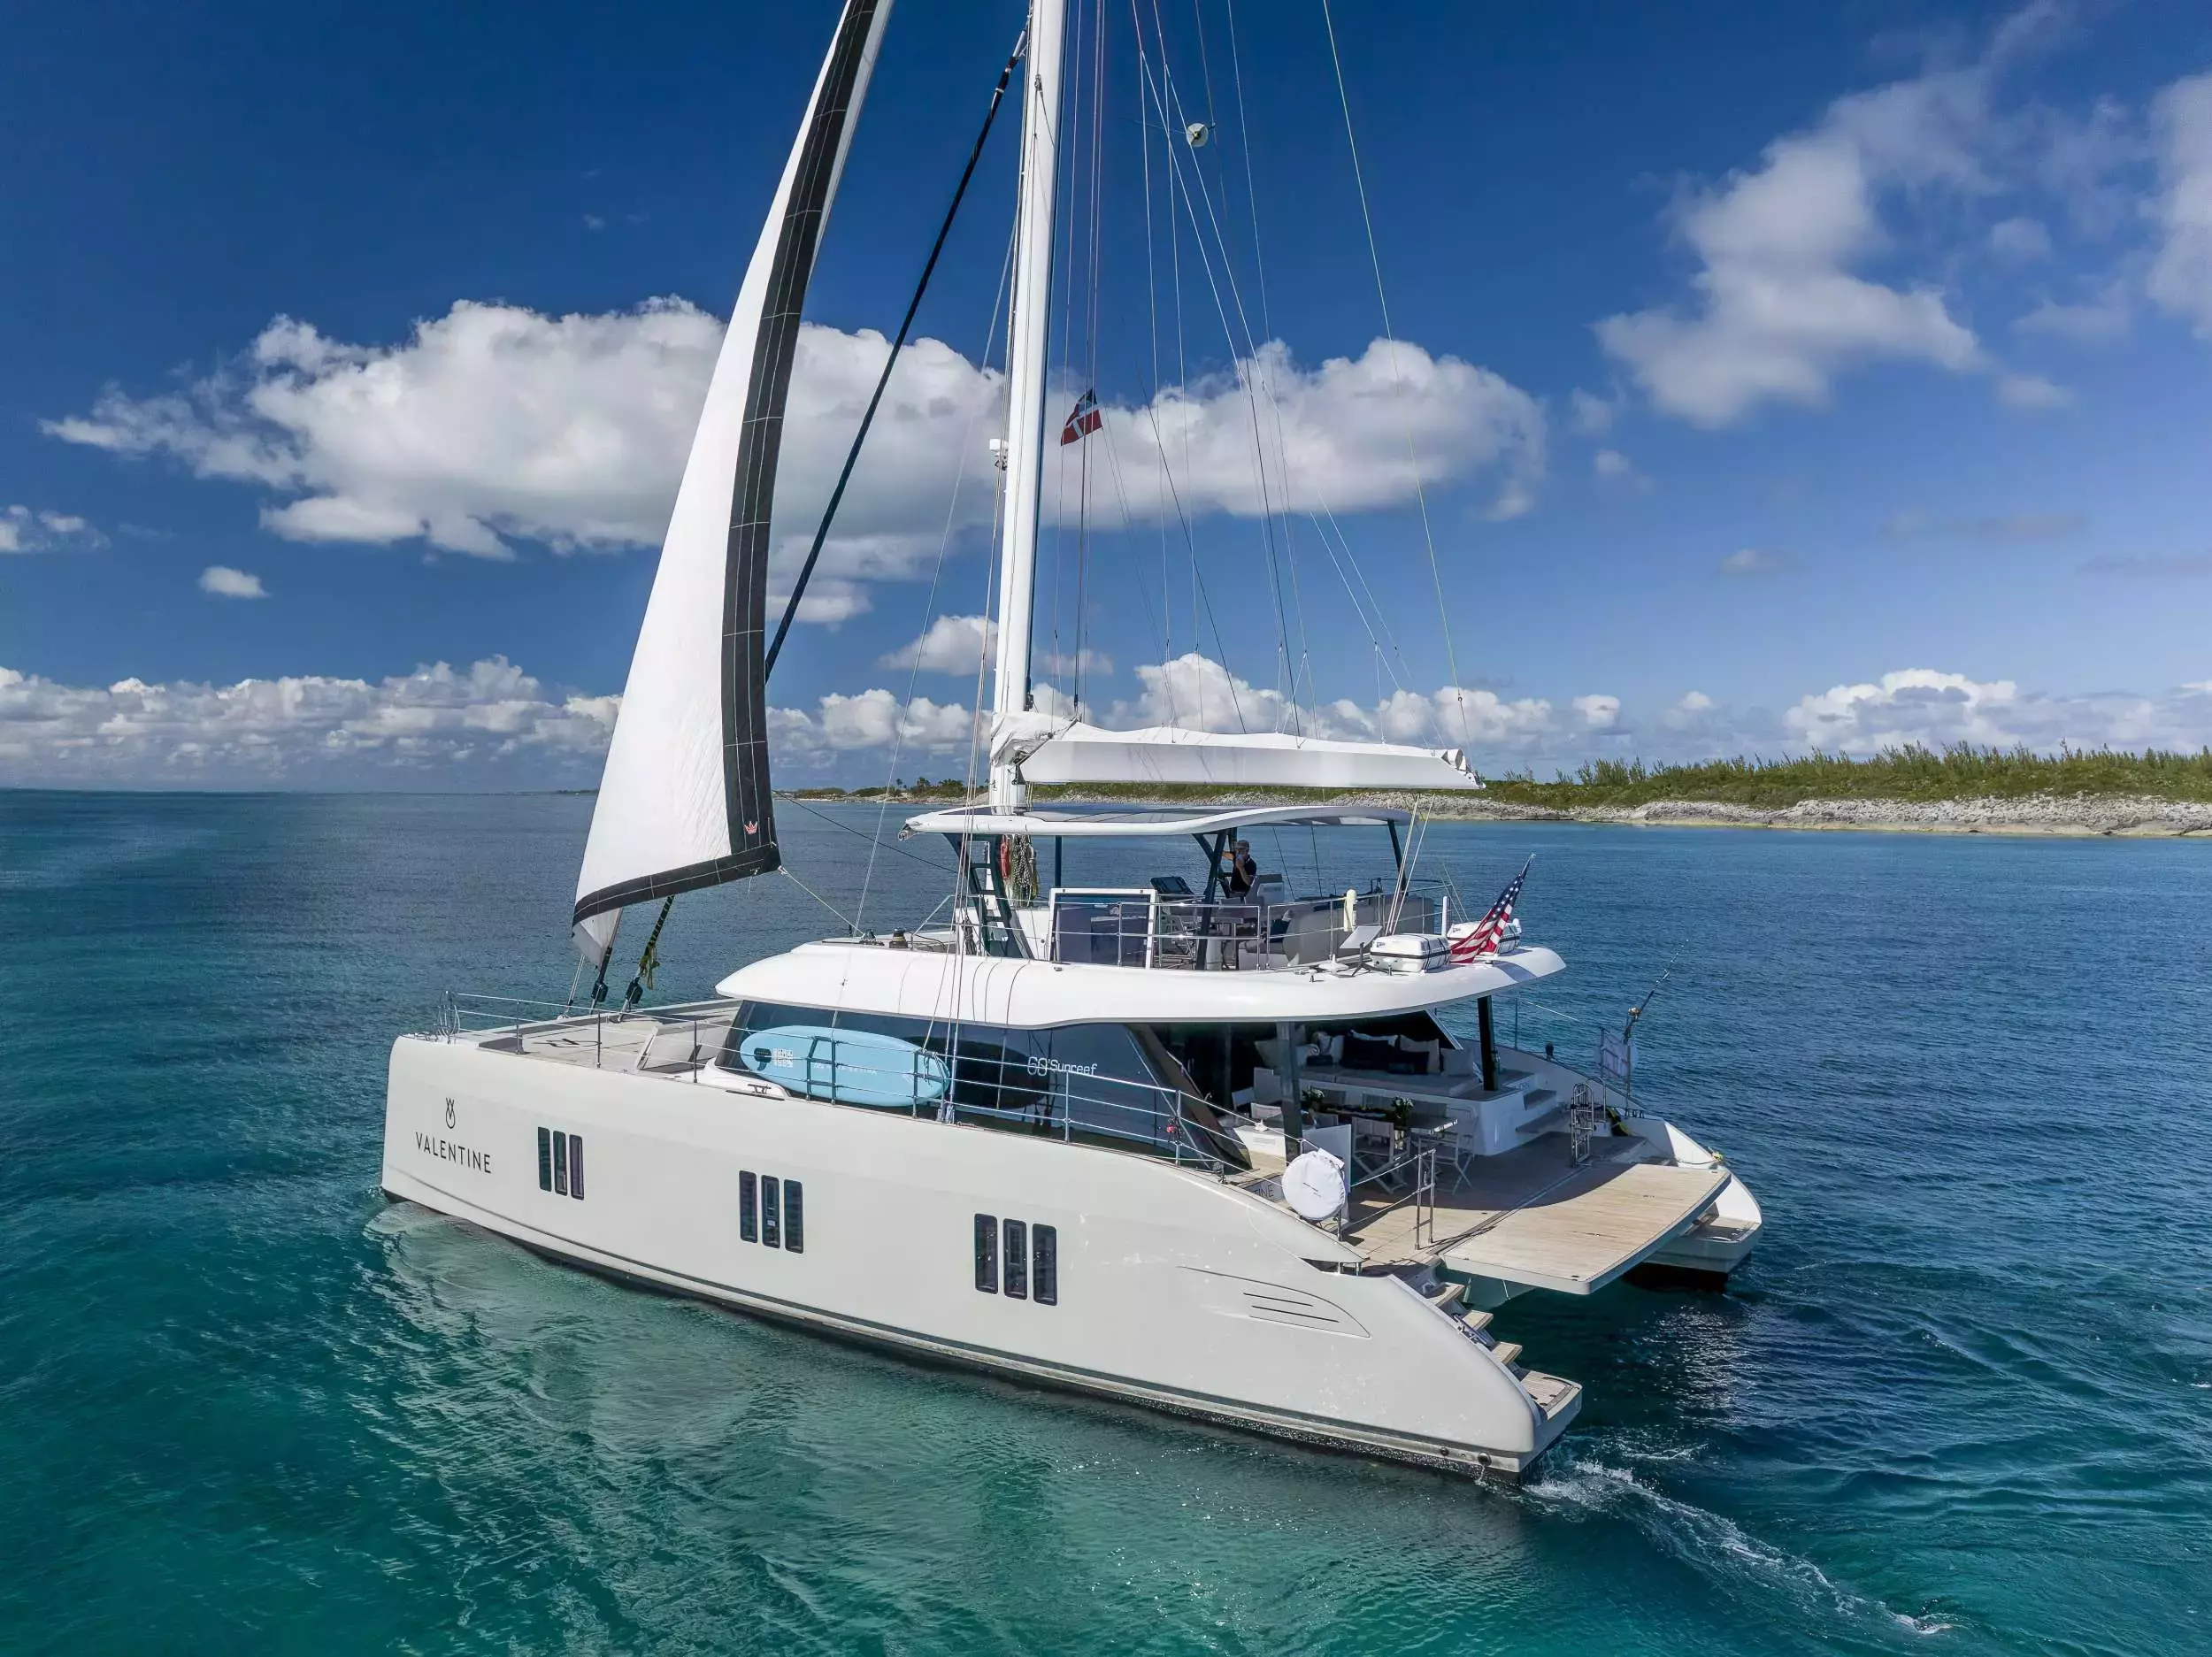 Valentine by Sunreef Yachts - Special Offer for a private Power Catamaran Charter in St John with a crew